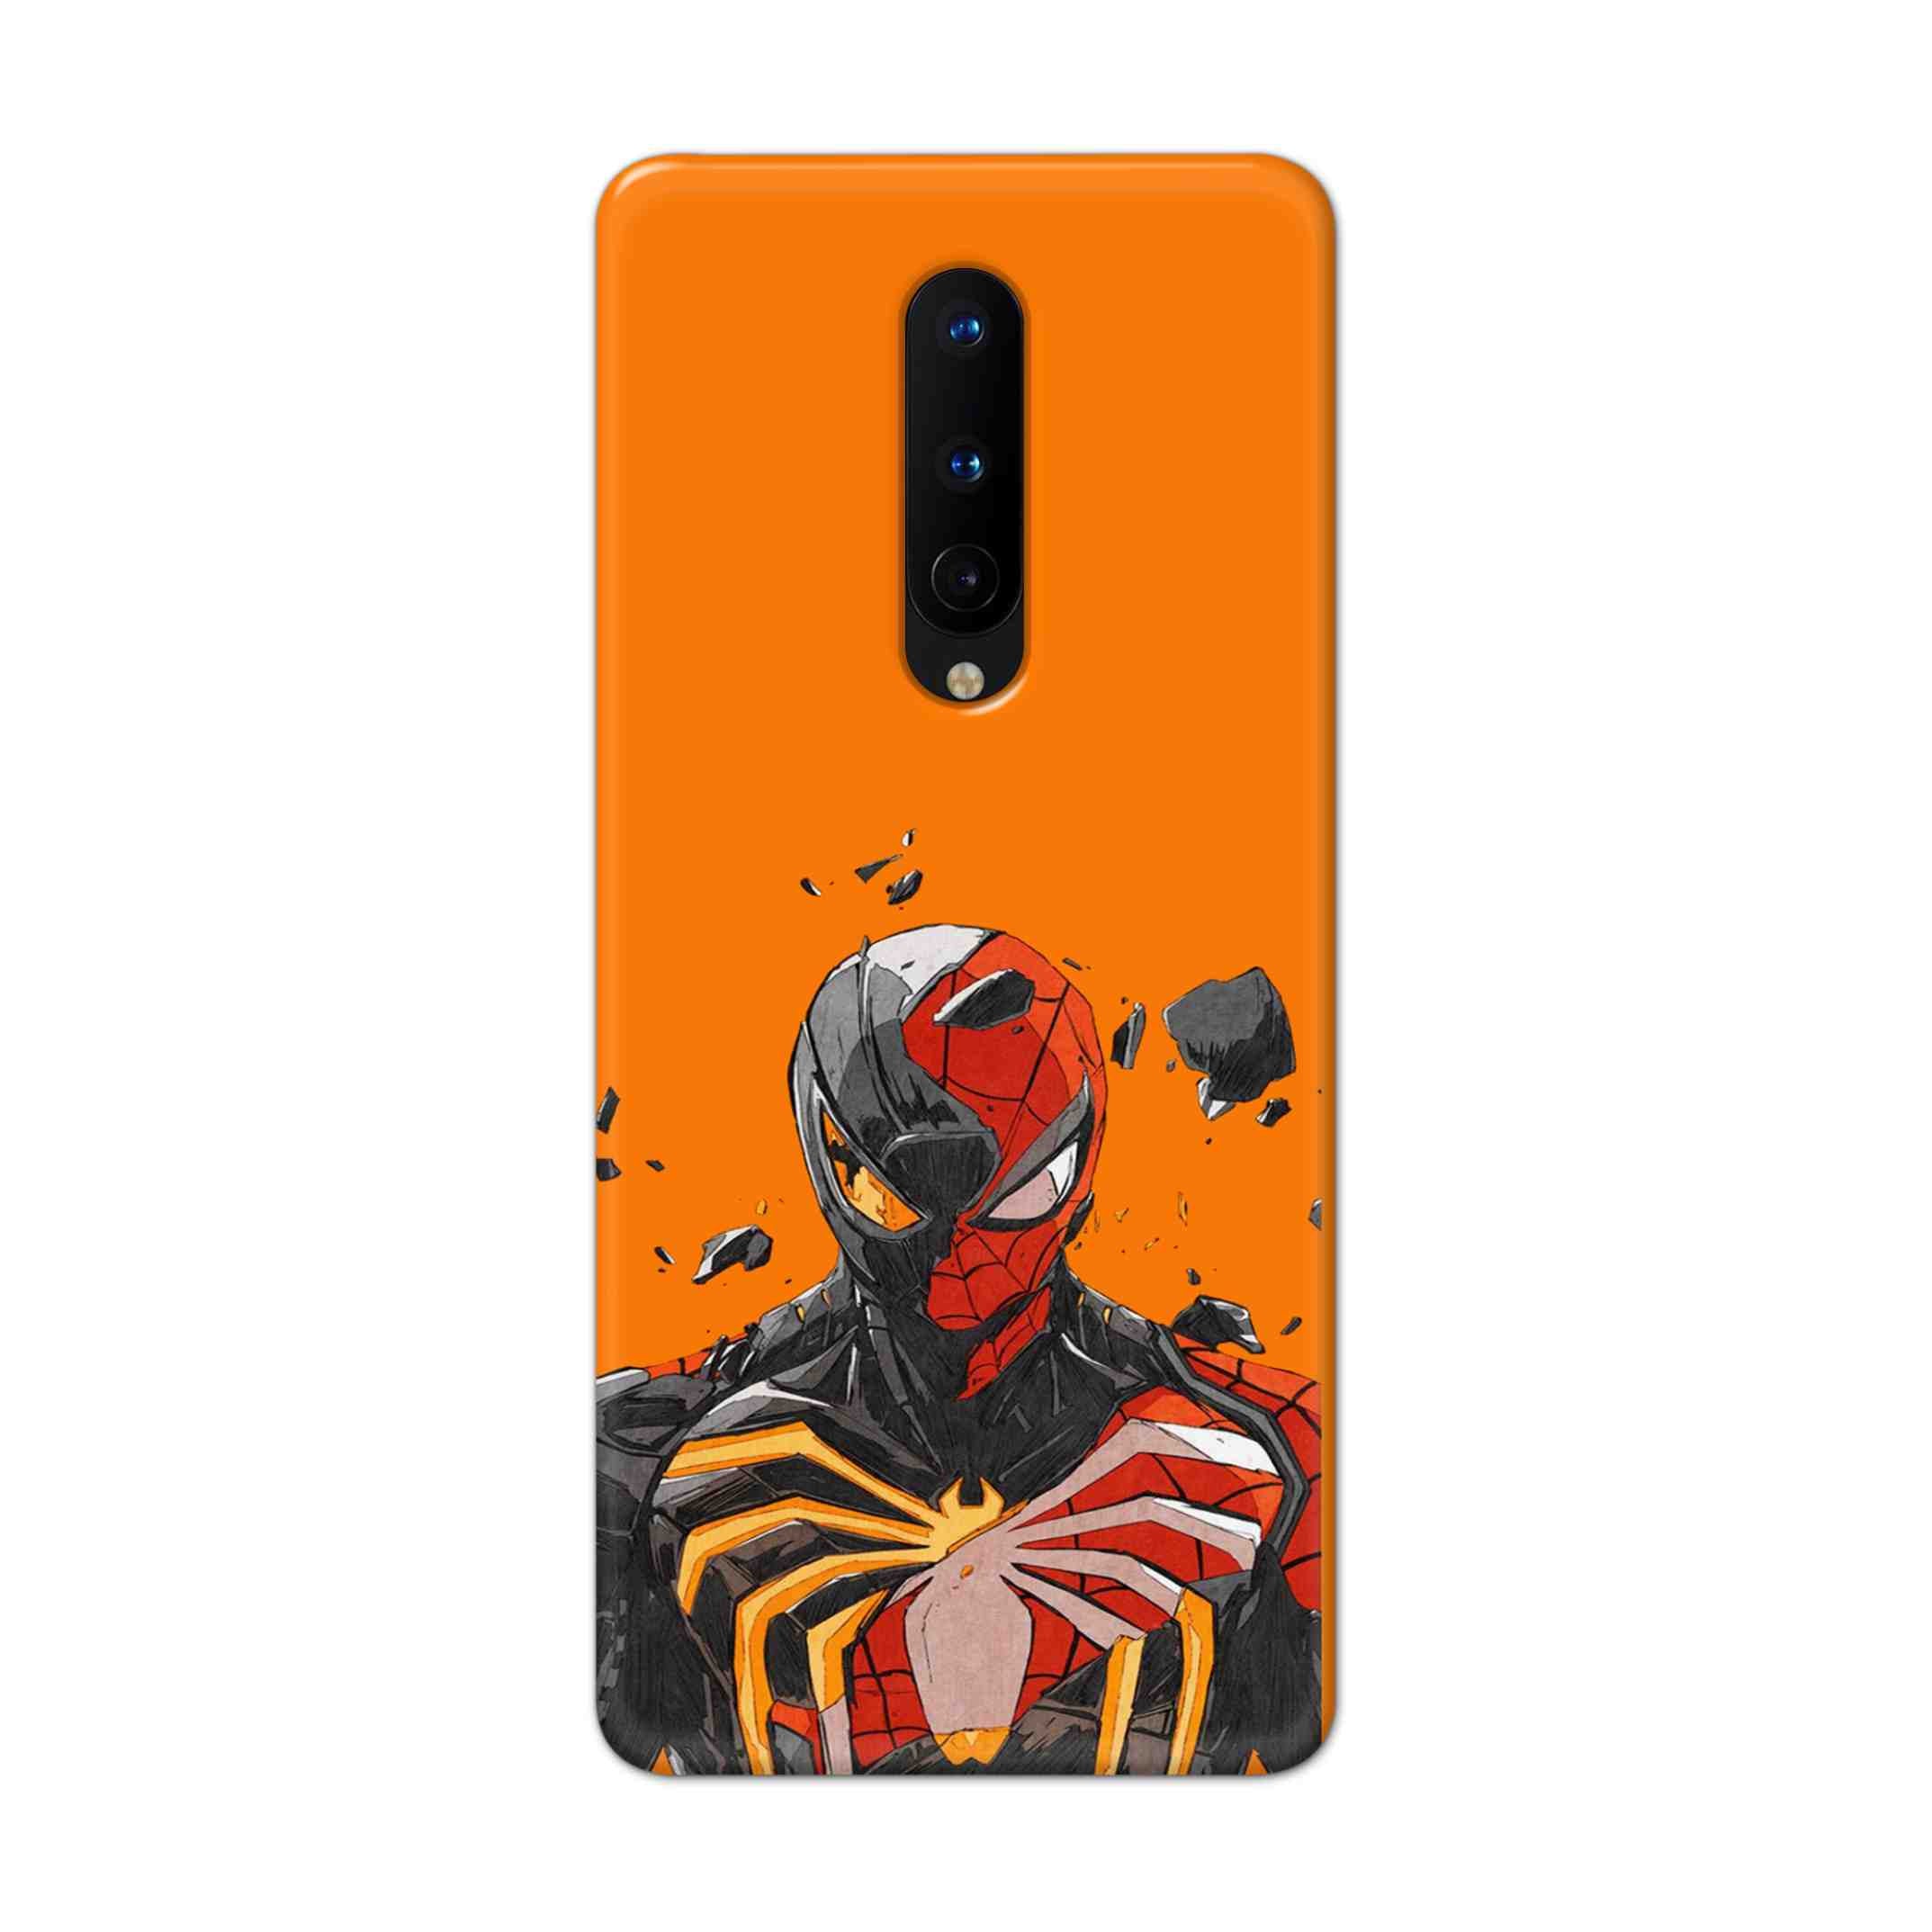 Buy Spiderman With Venom Hard Back Mobile Phone Case Cover For OnePlus 8 Online